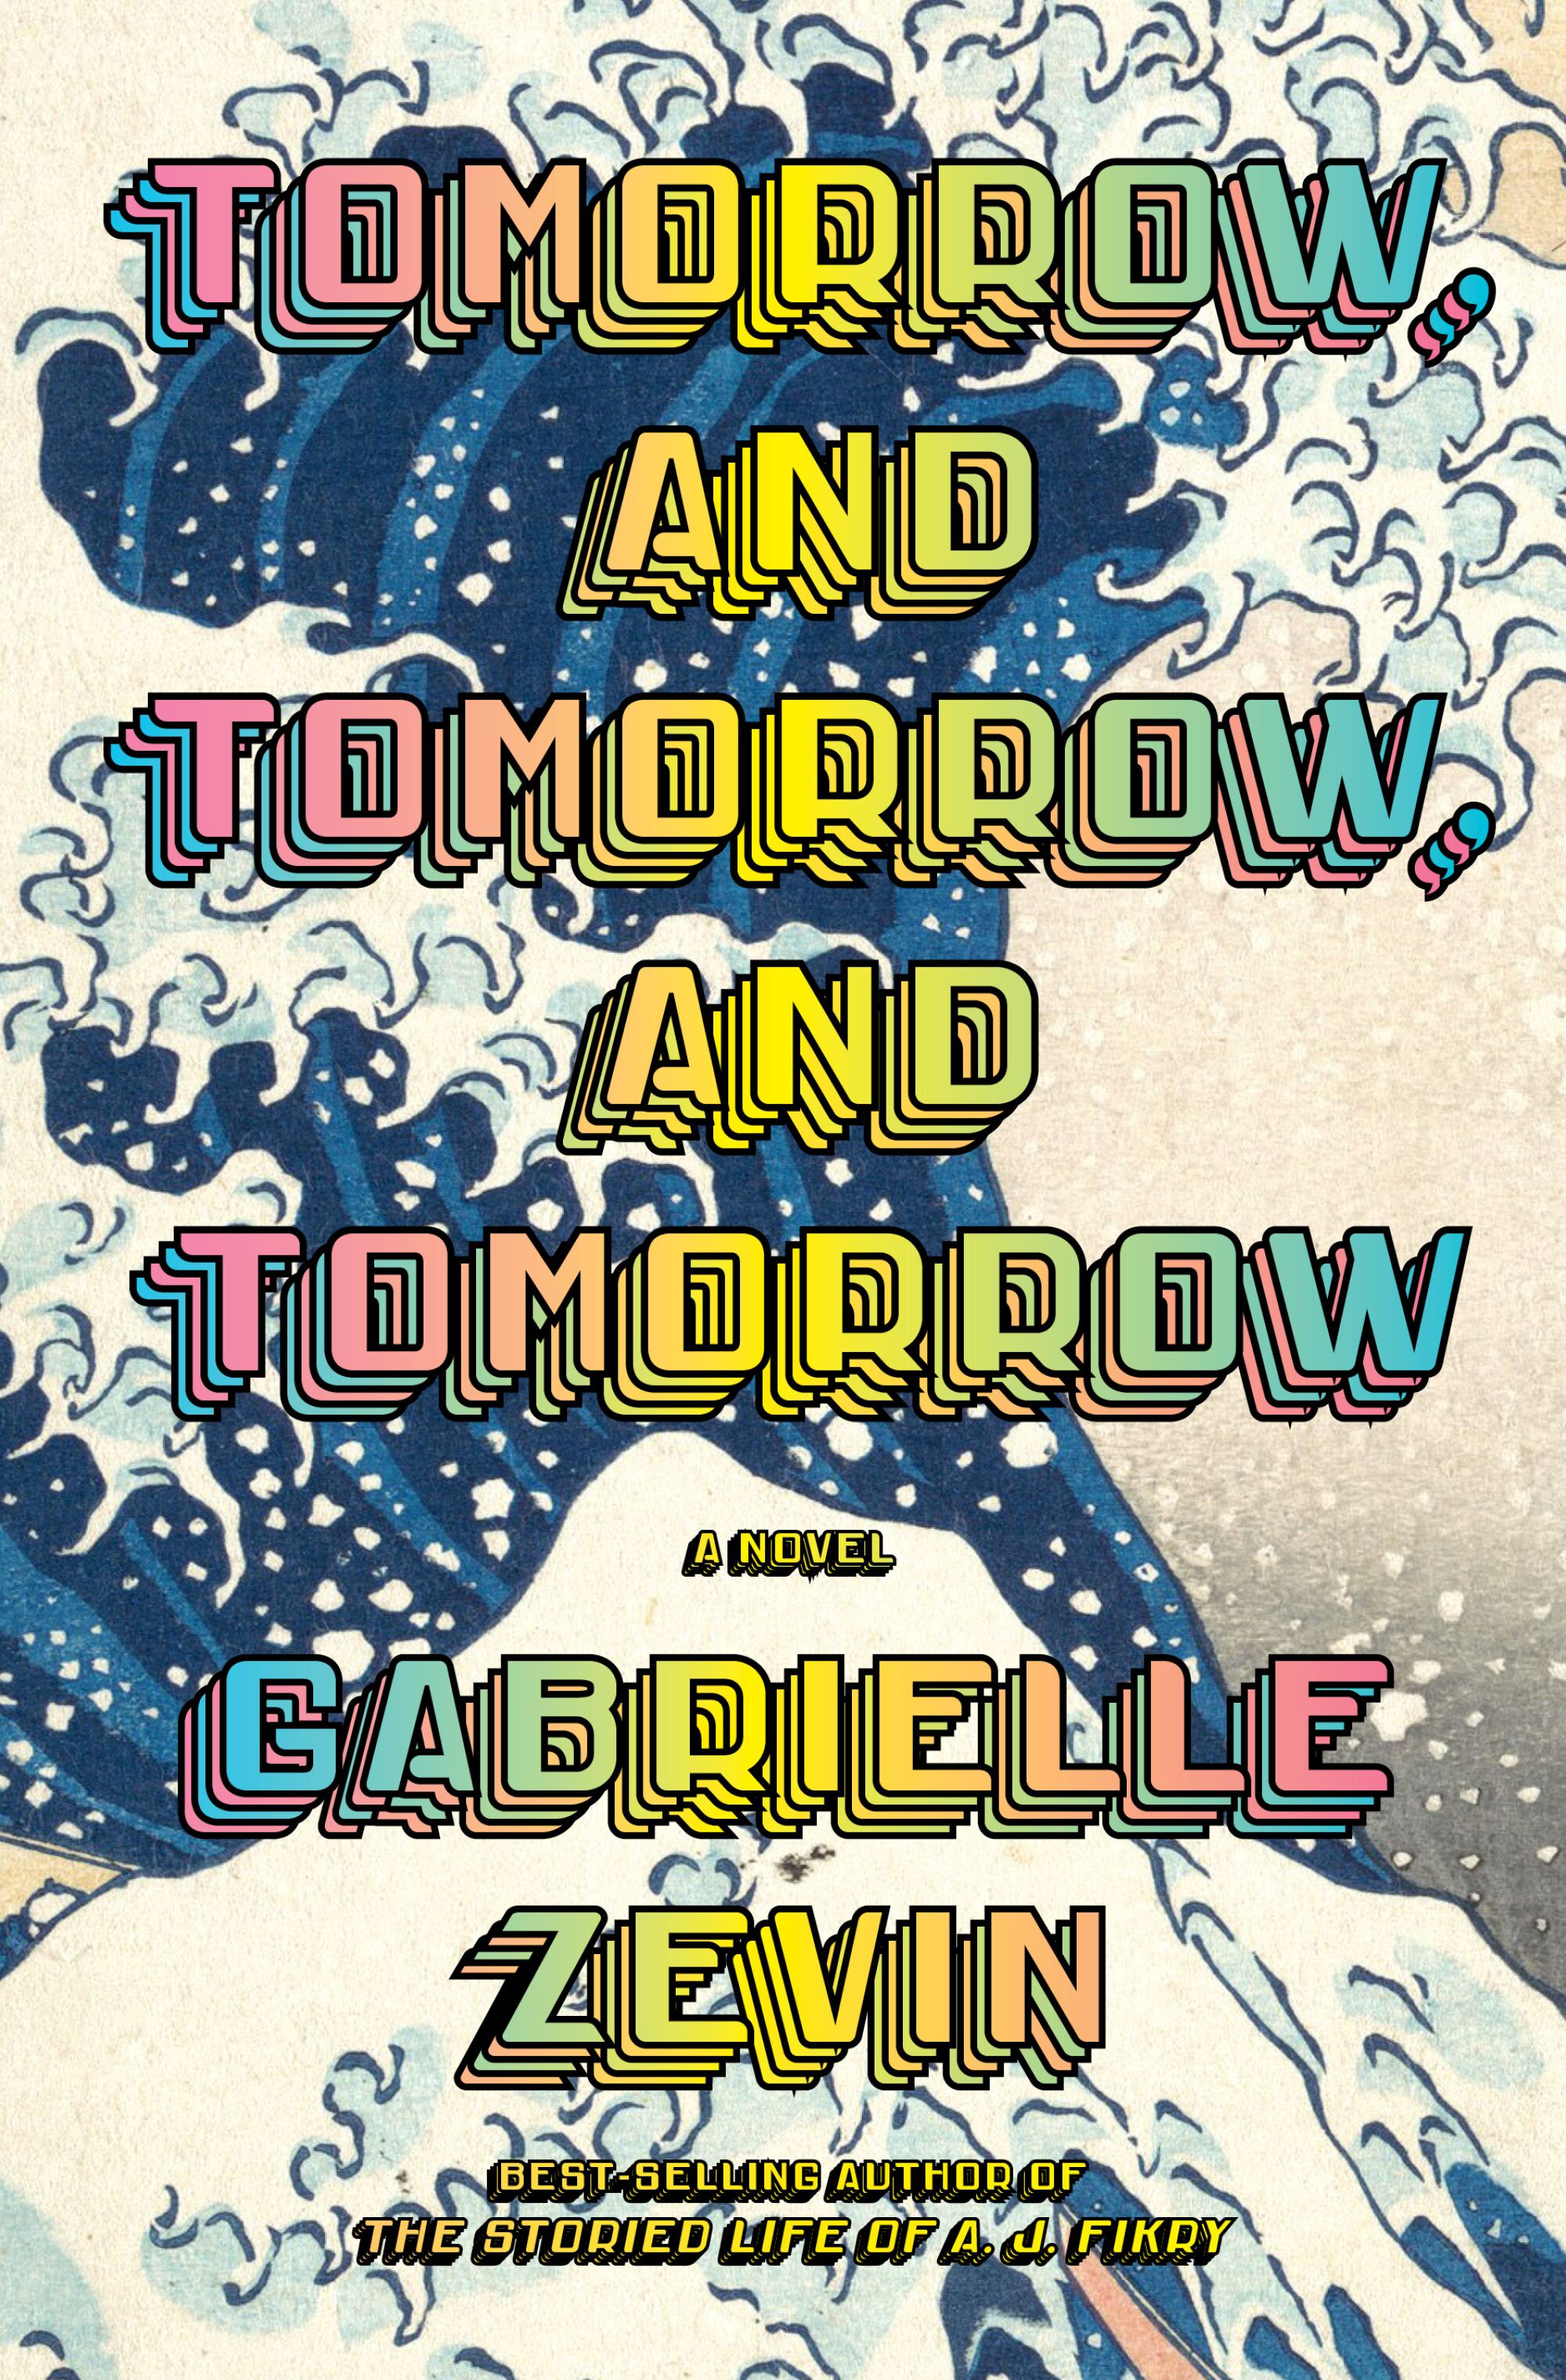 Video game-like font with wave illustrations on the cover of "Tomorrow, and tomorrow, and tomorrow," by Gabrielle Zevin